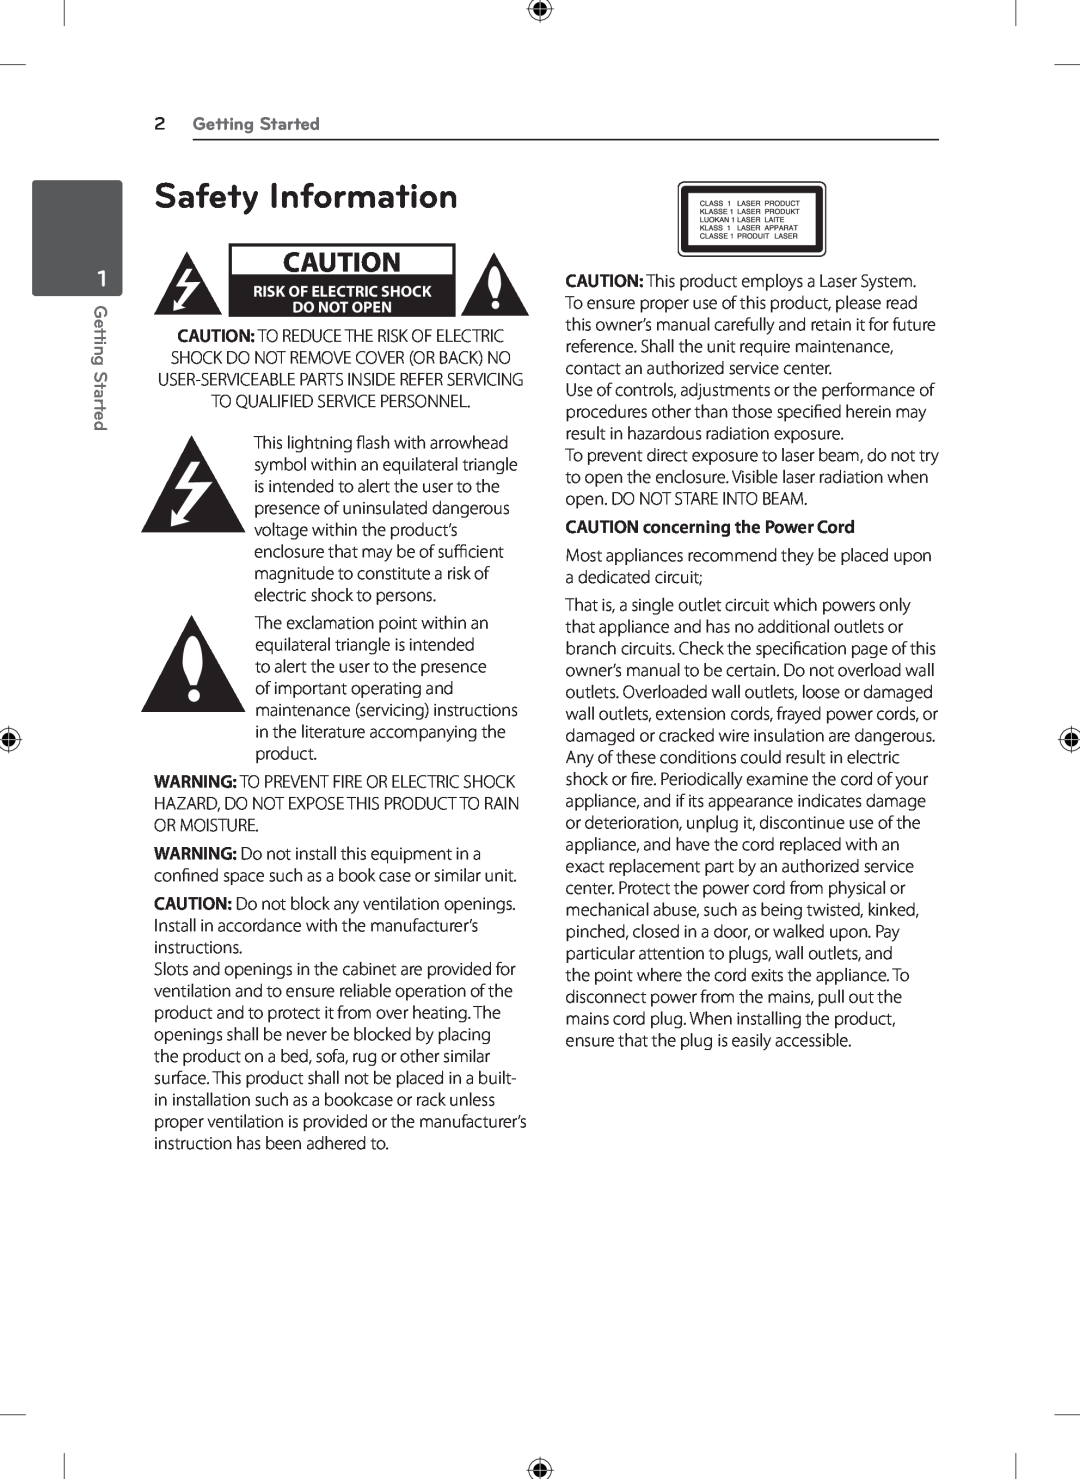 LG Electronics KSM1506 owner manual Safety Information, 2Getting Started, CAUTION concerning the Power Cord 